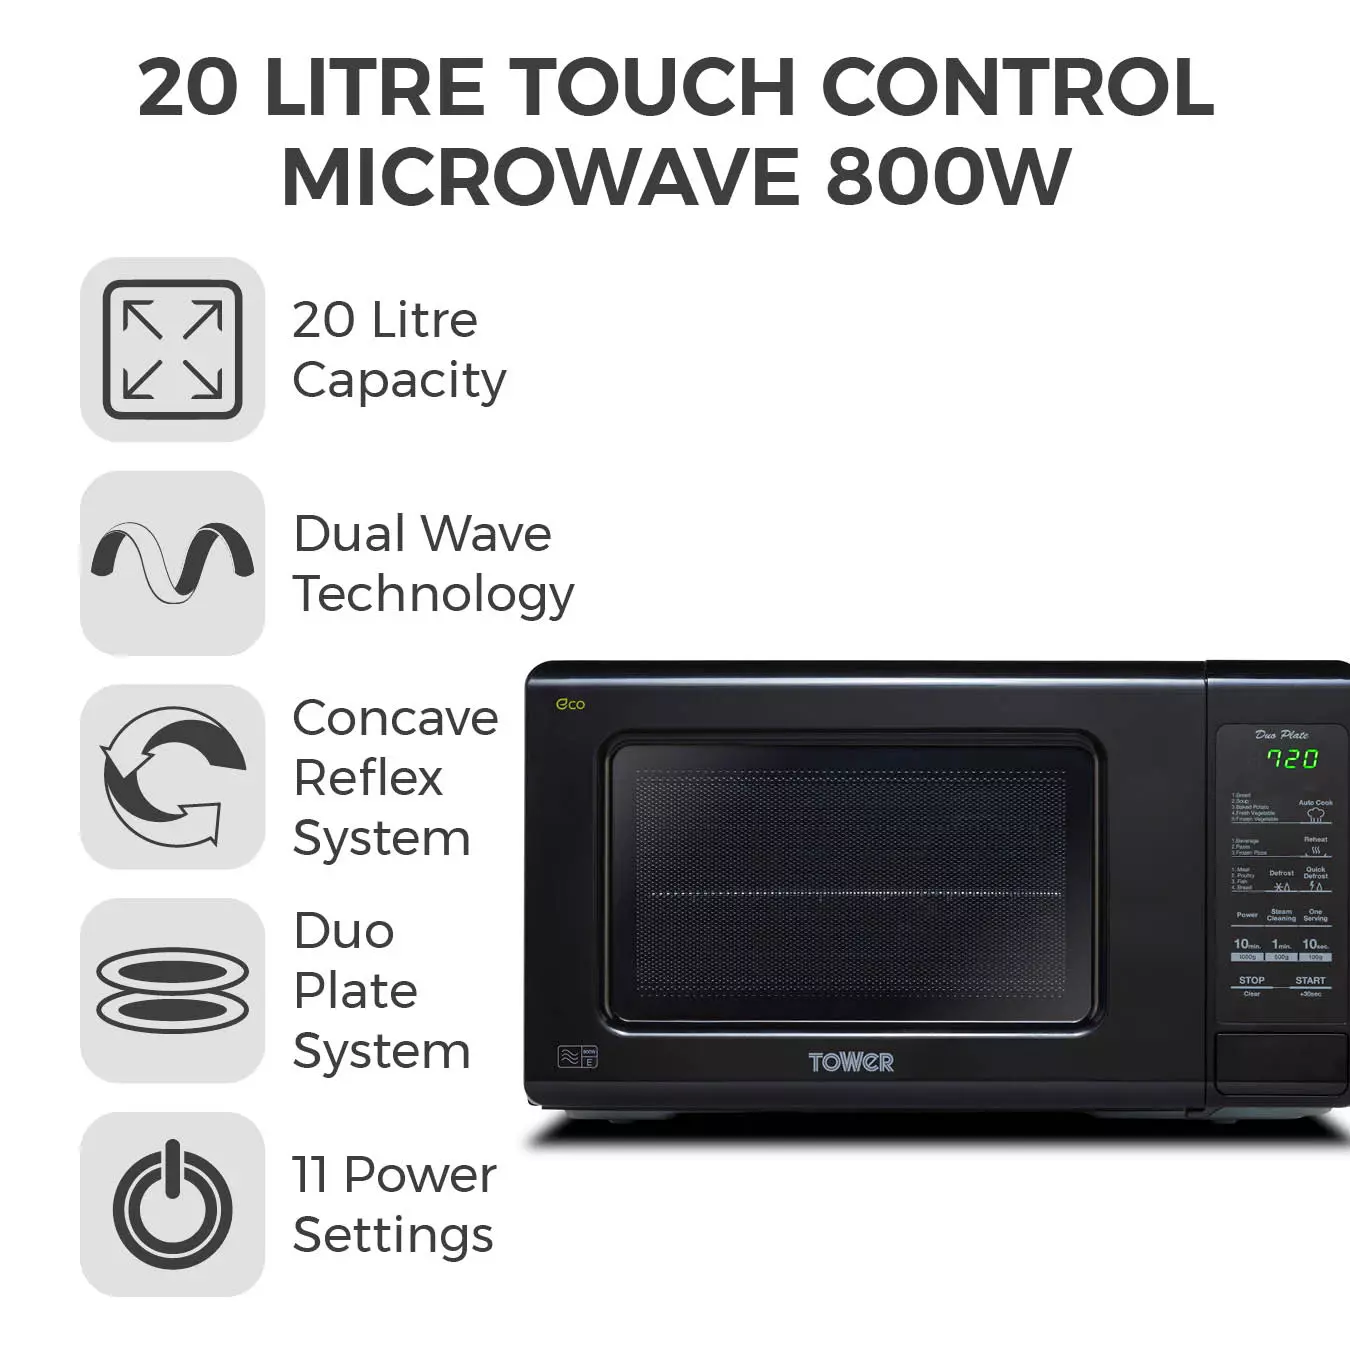 800 W Daewoo Duo-Plate Touch Control Microwave 20 Litre White 